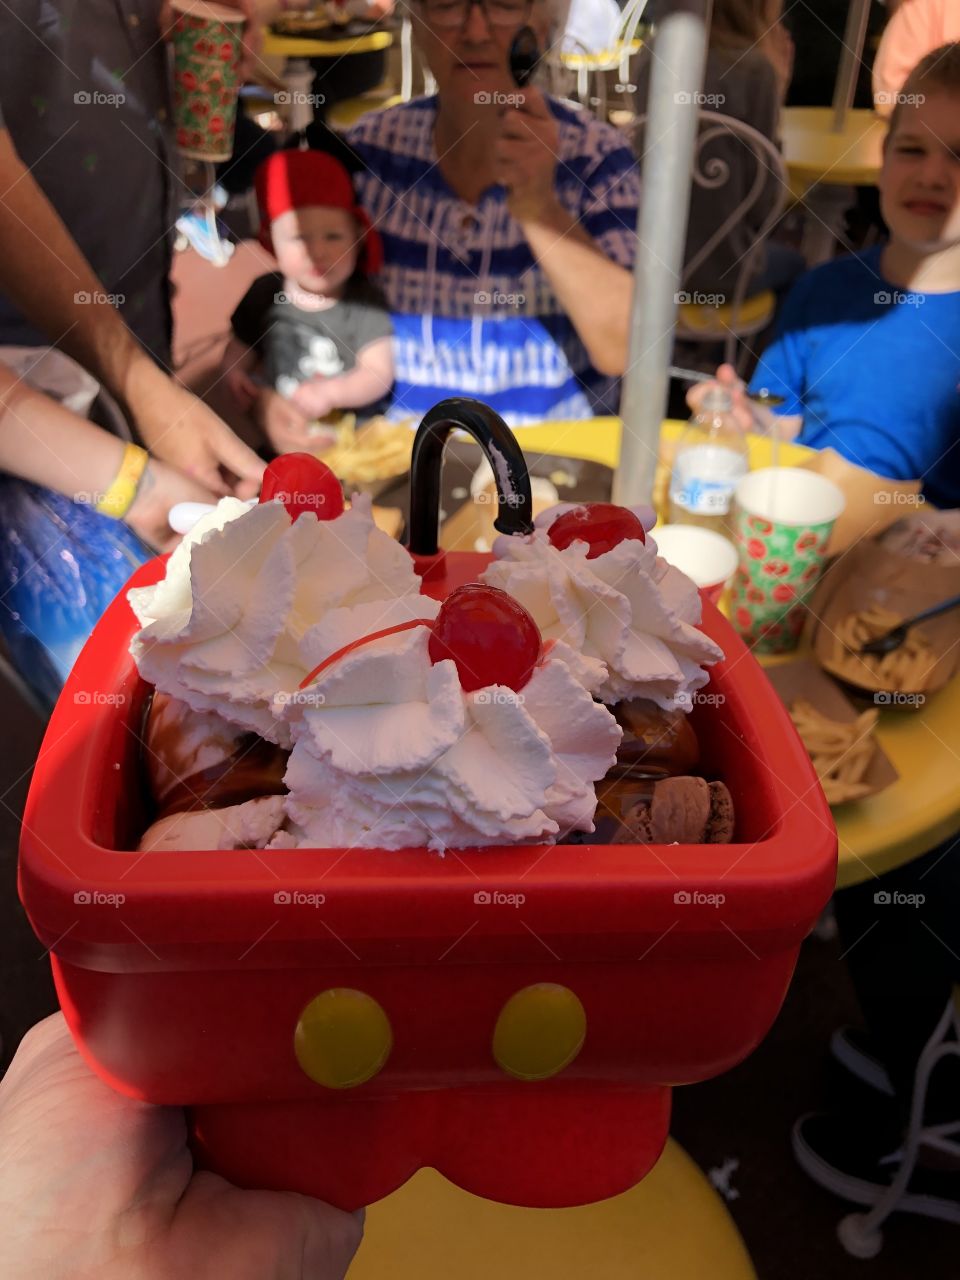 Everything but the kitchen sink at Disney 